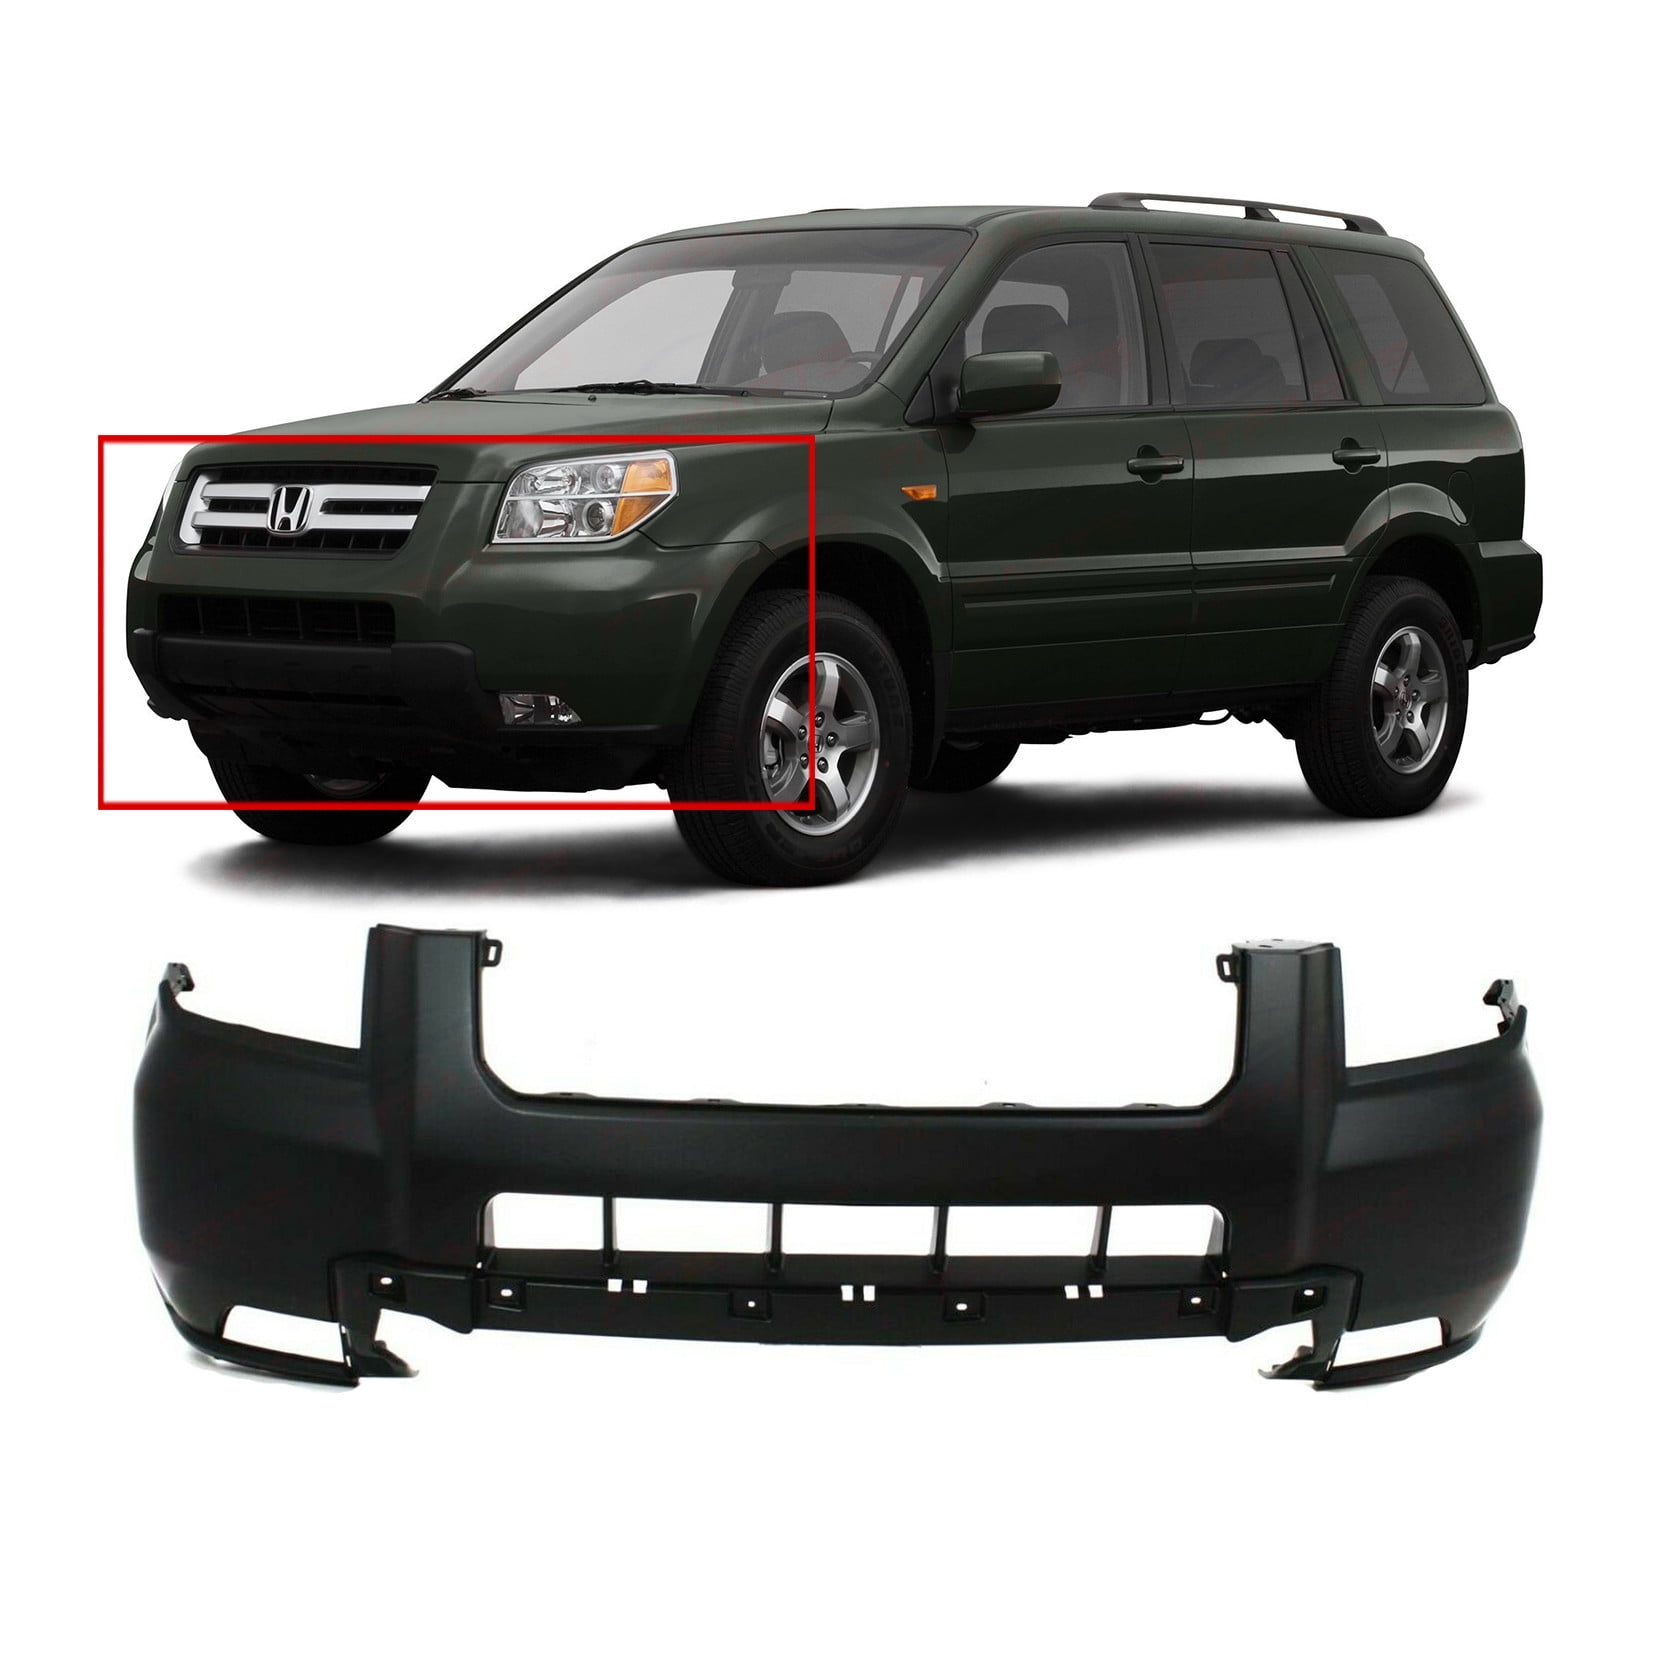 TRX450R 2004-2009 Compatible with/Replacement For Honda TRX450ER 2006-2014 New All Balls Shock Bumper 37-1221